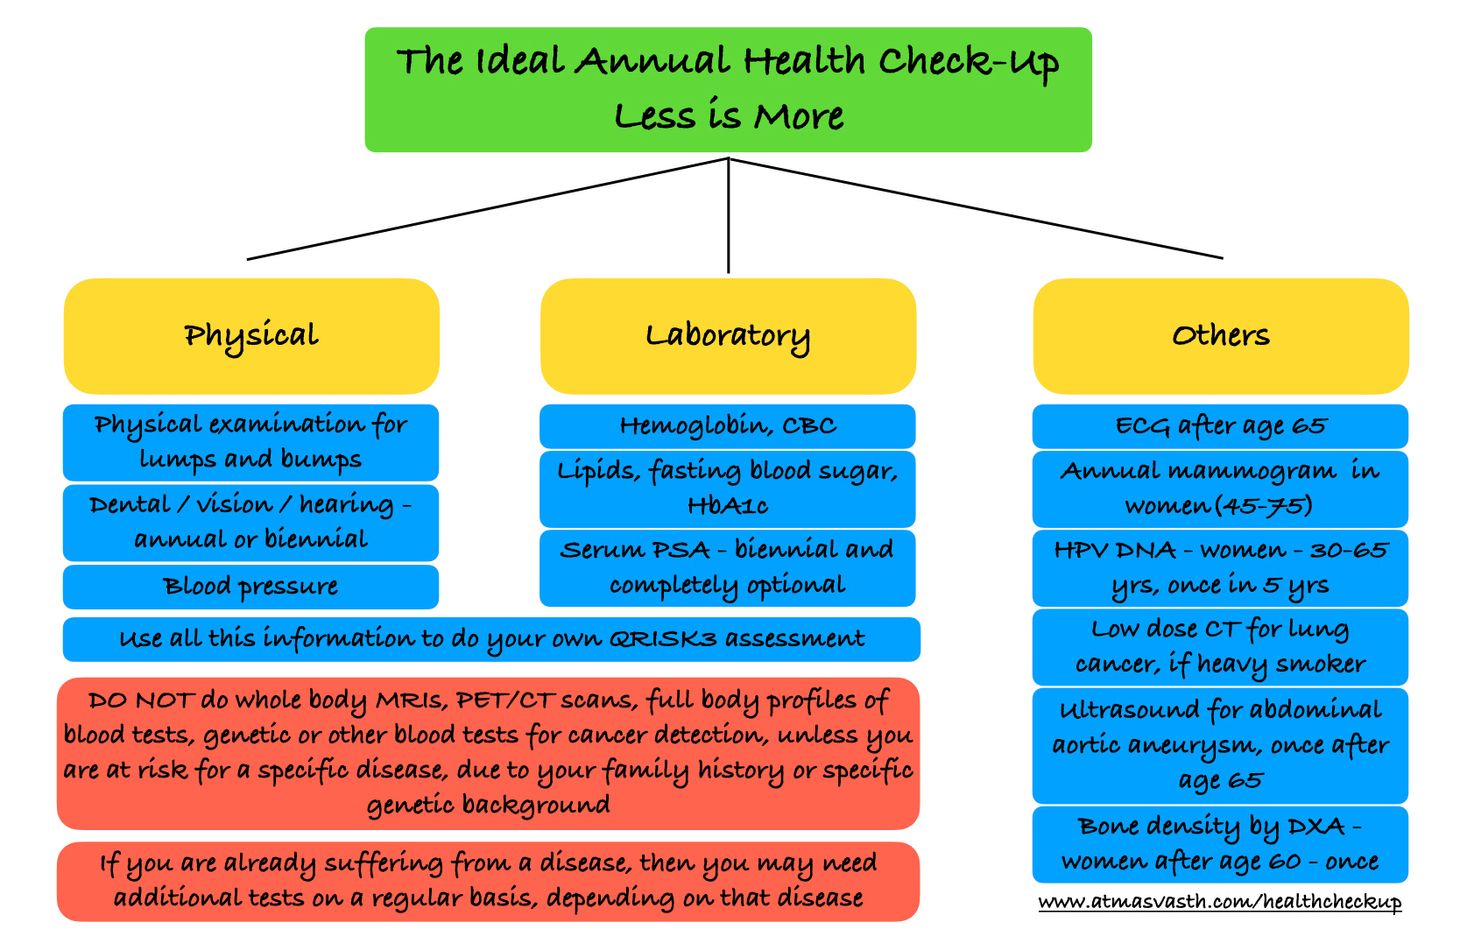 The Ideal Annual Health Check-Up - Less is More